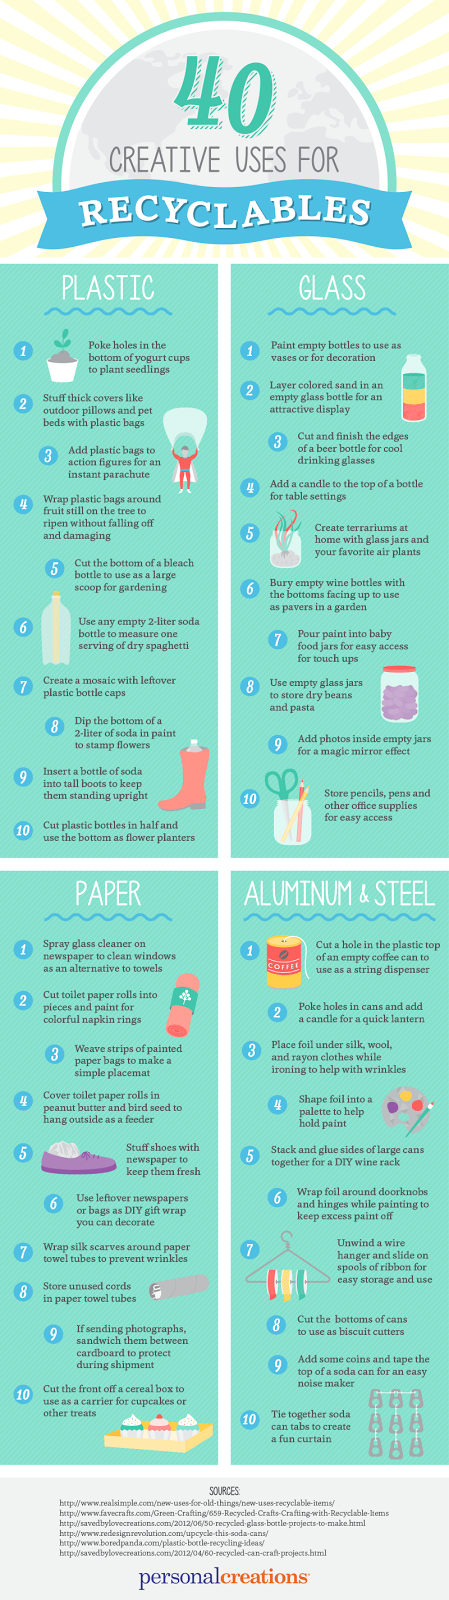 40 creative uses for recyclables